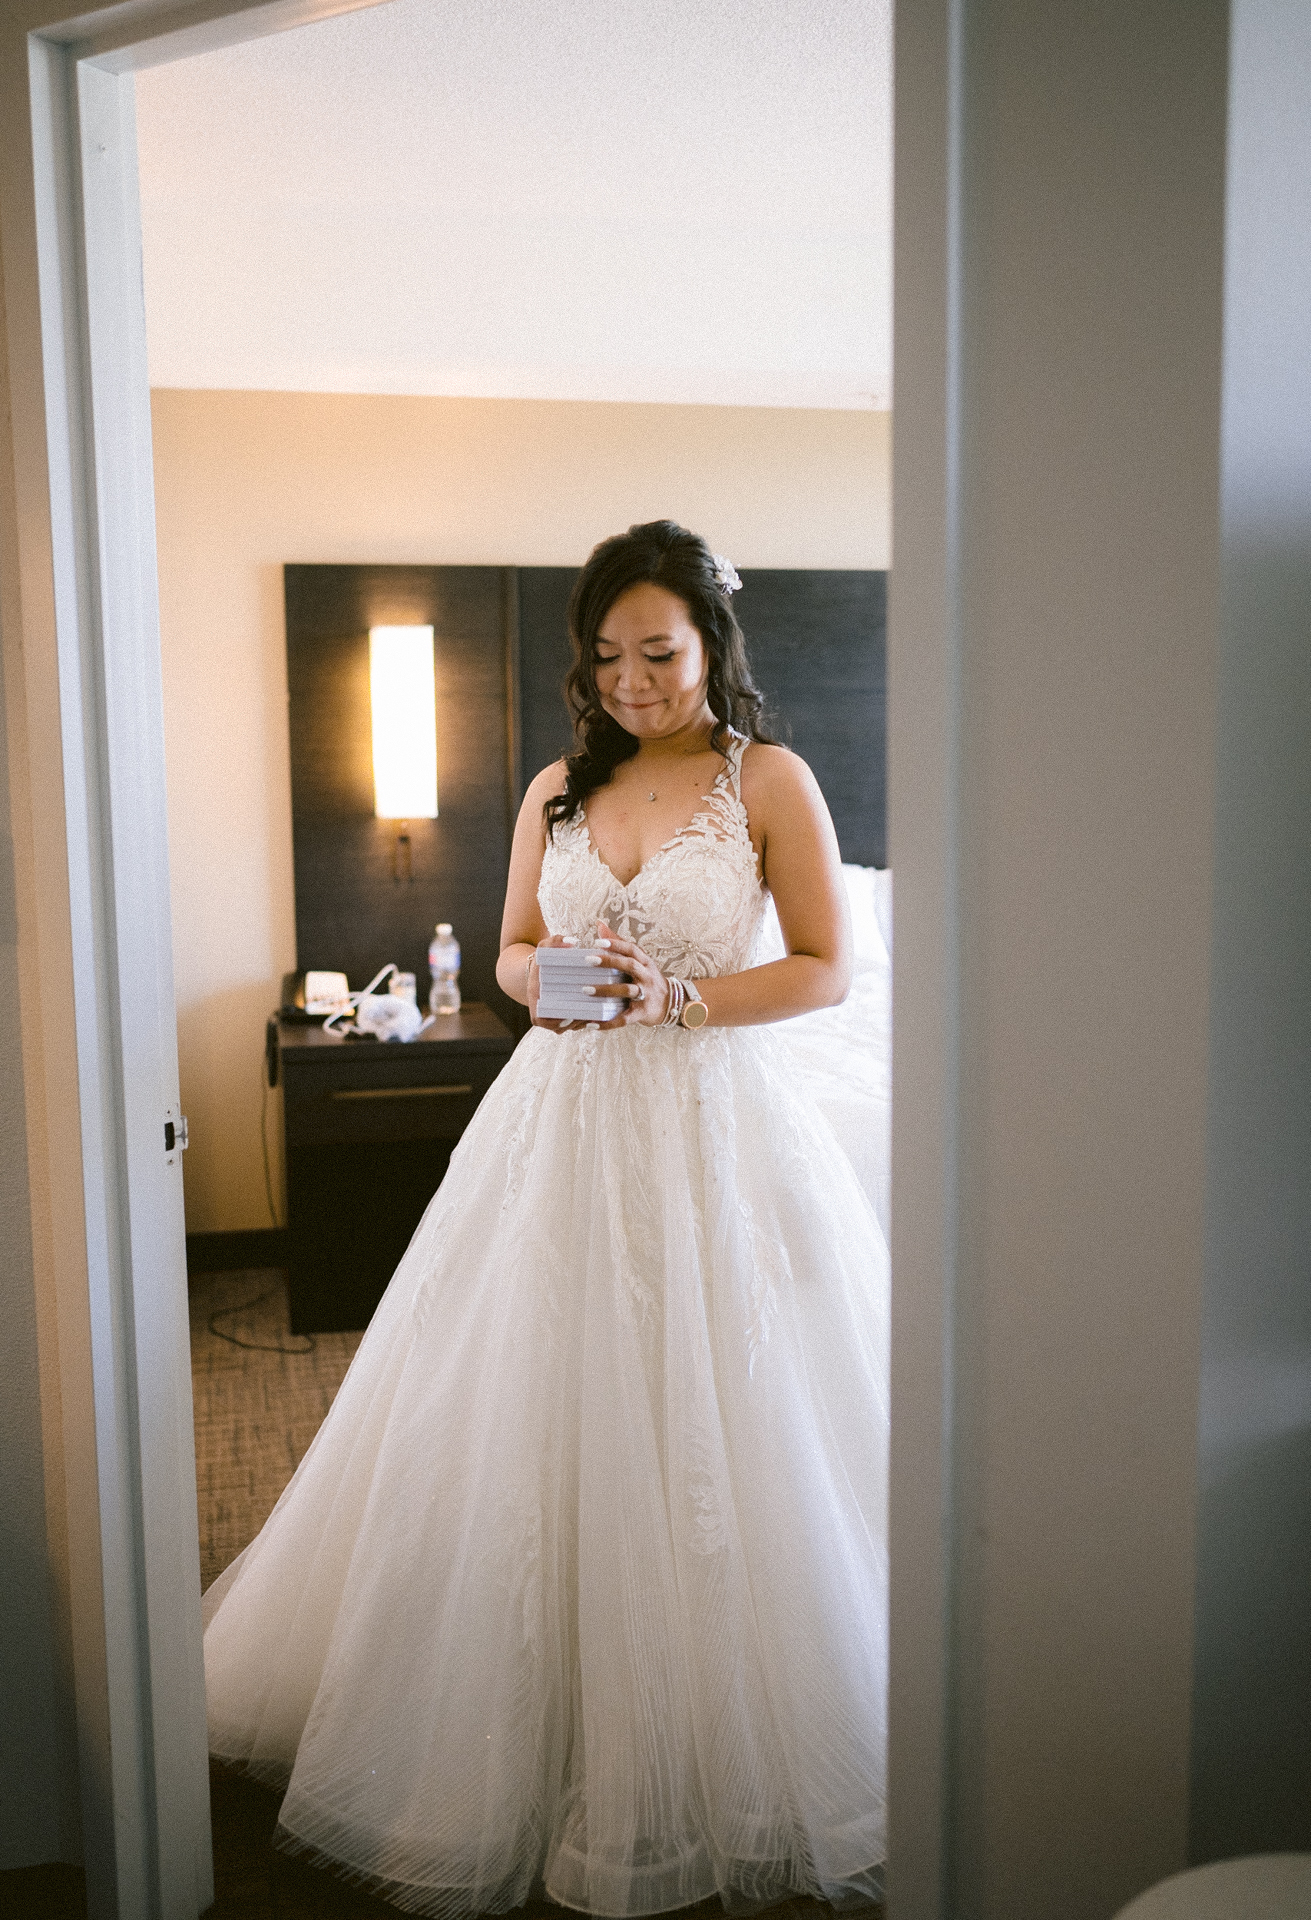 A bride in a white gown holding a cup, standing contemplatively in a hotel room.